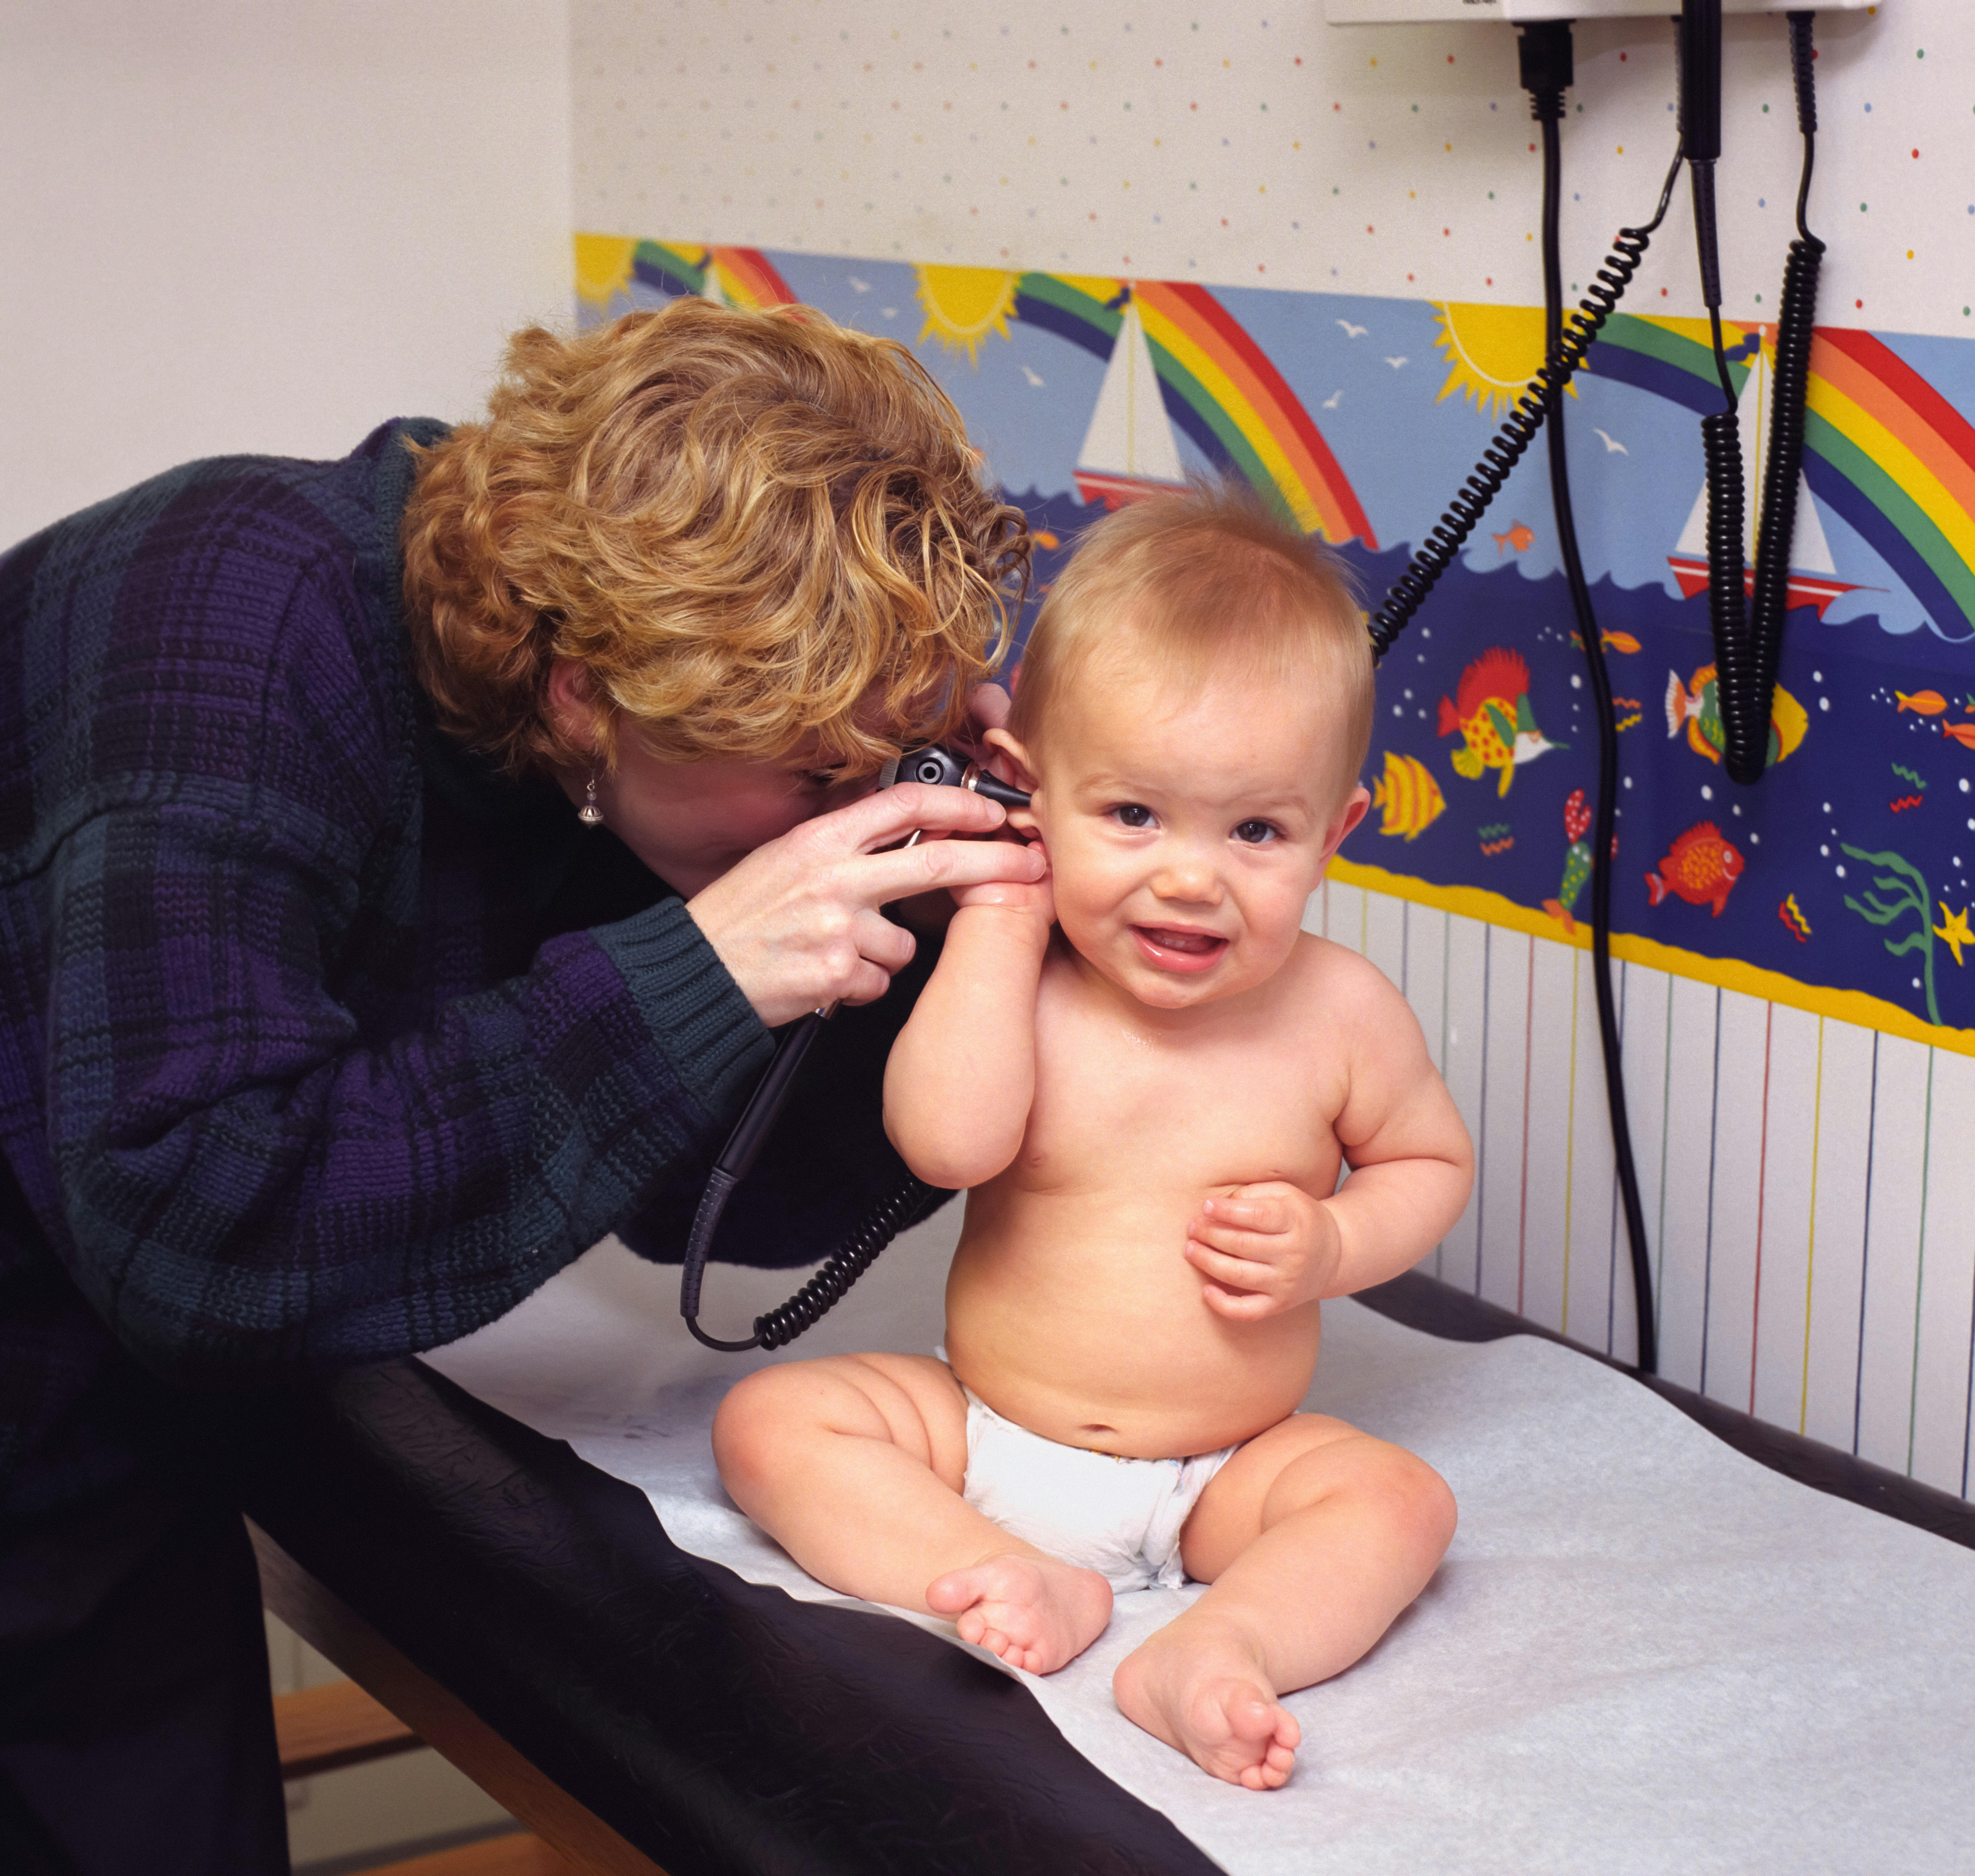 Image shows a pediatrician with short blond hair inspecting a baby's right ear.